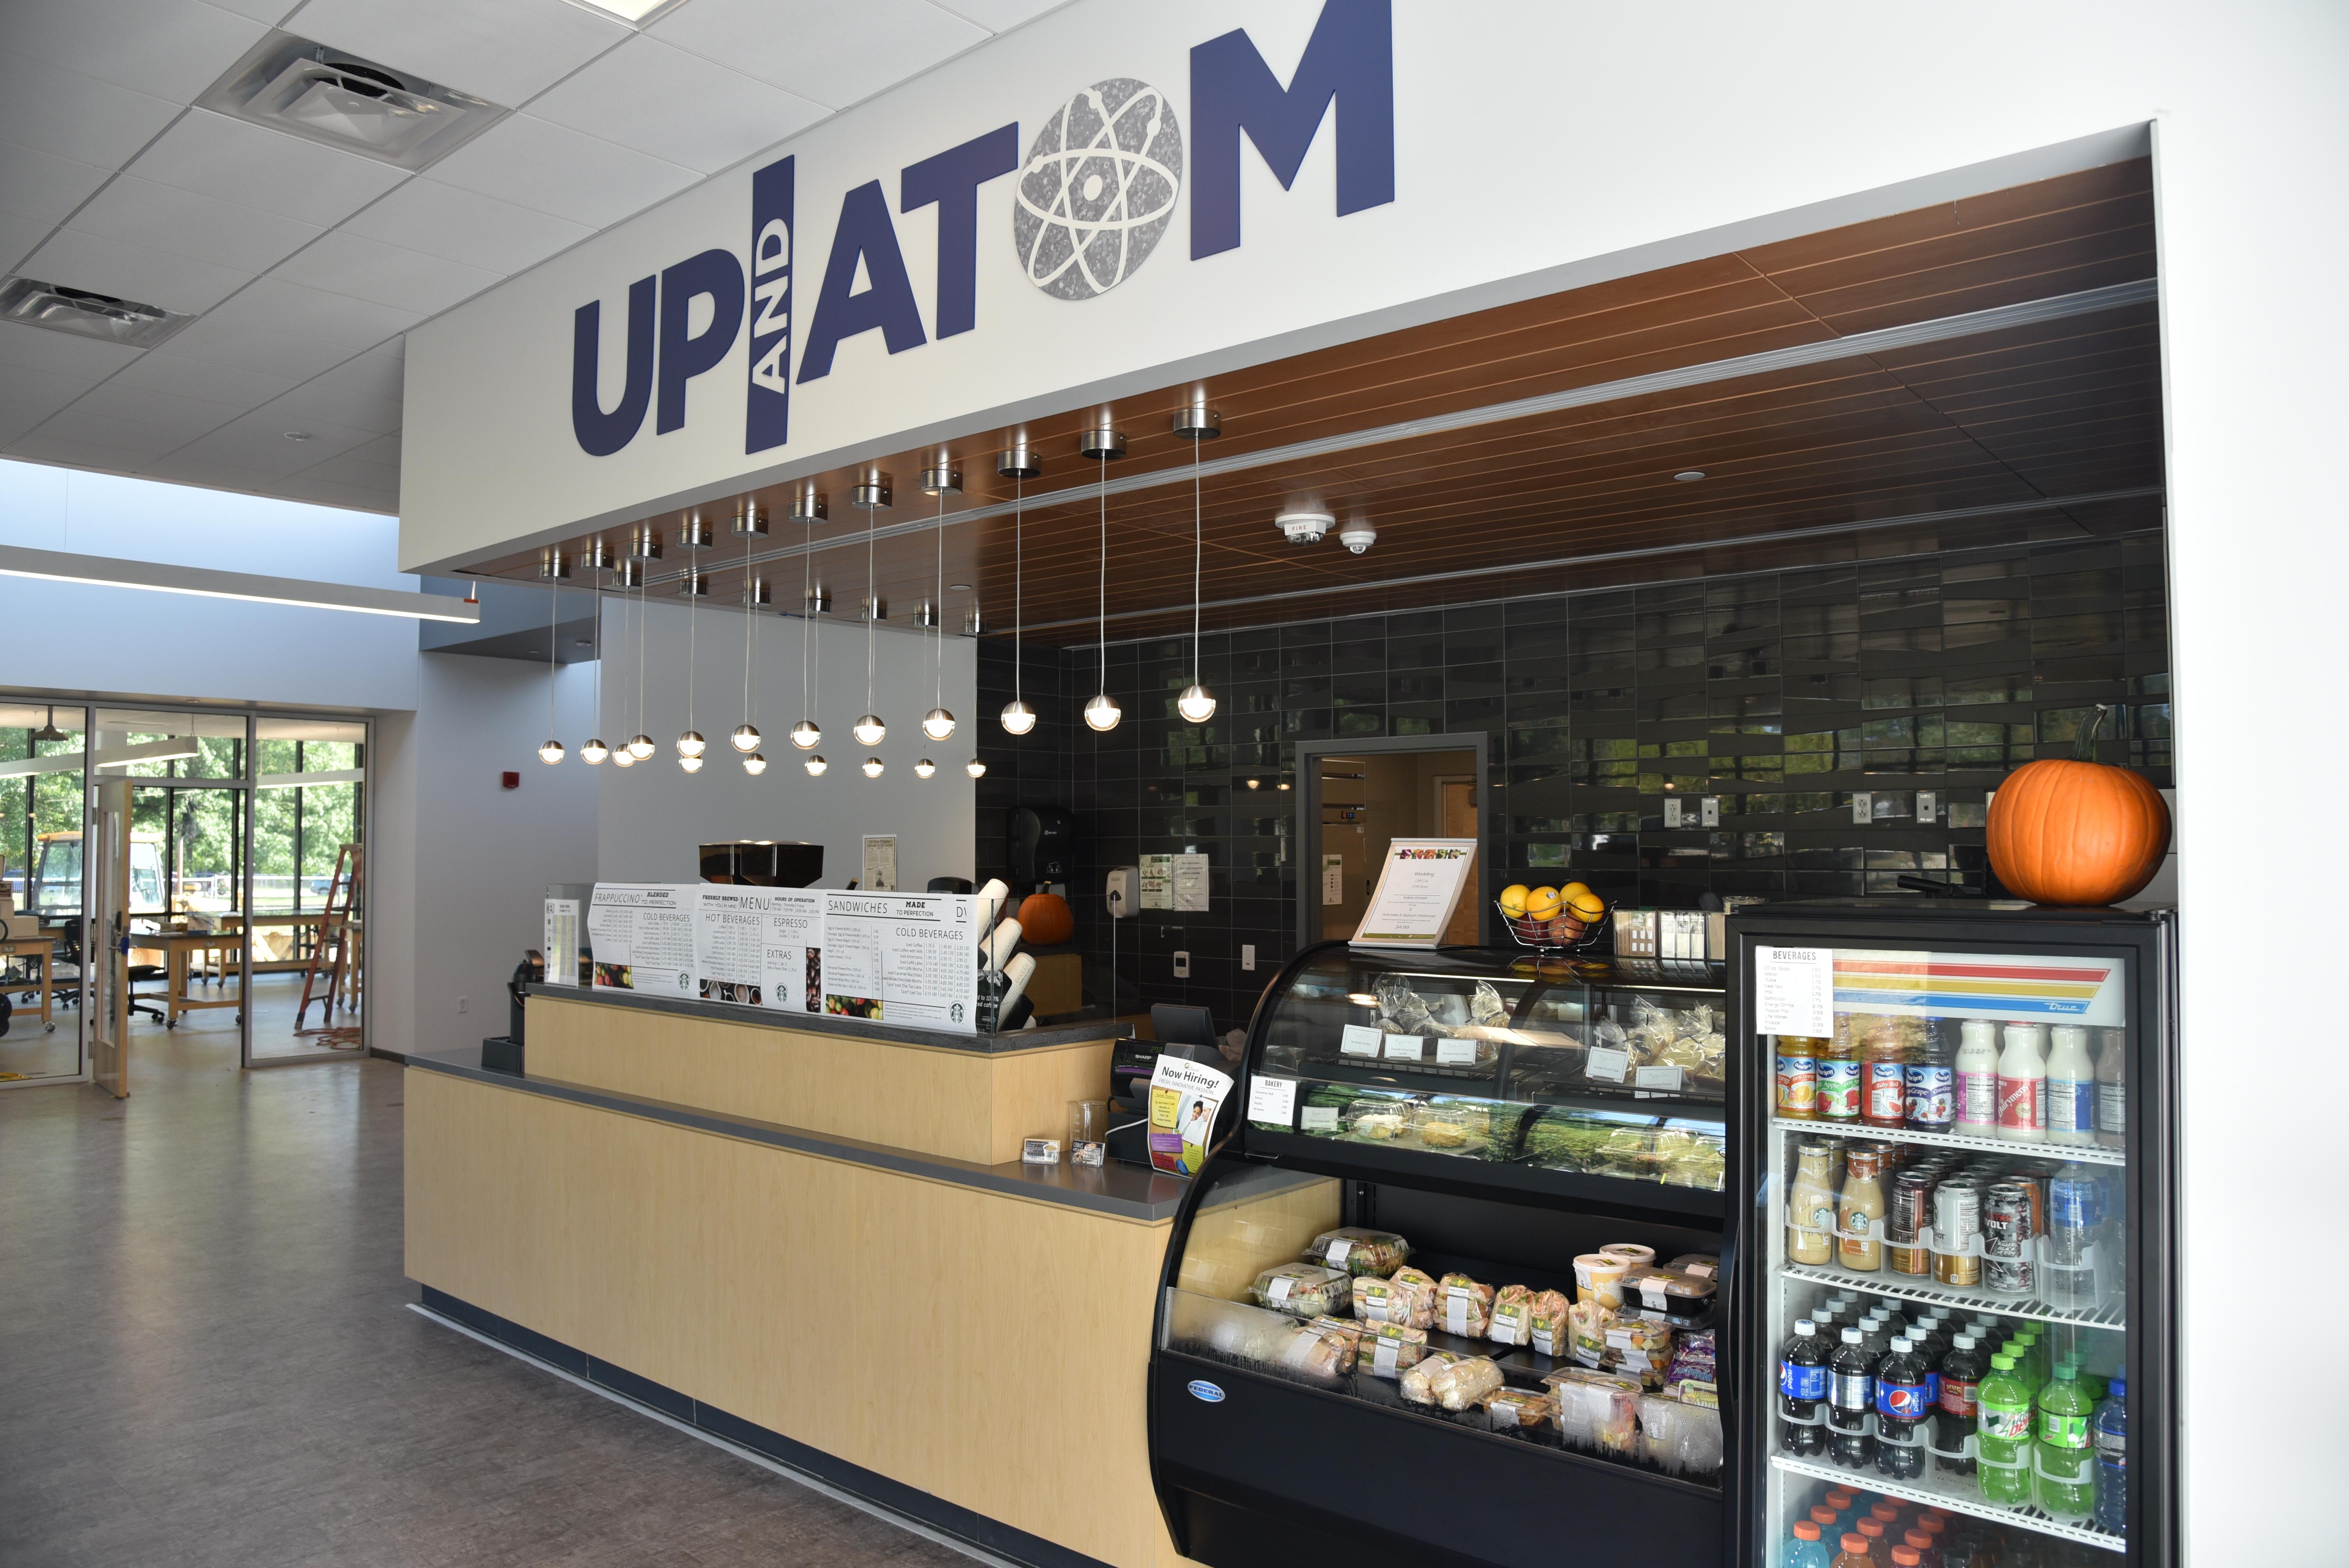 Up and Atom cafe serves coffee and more.